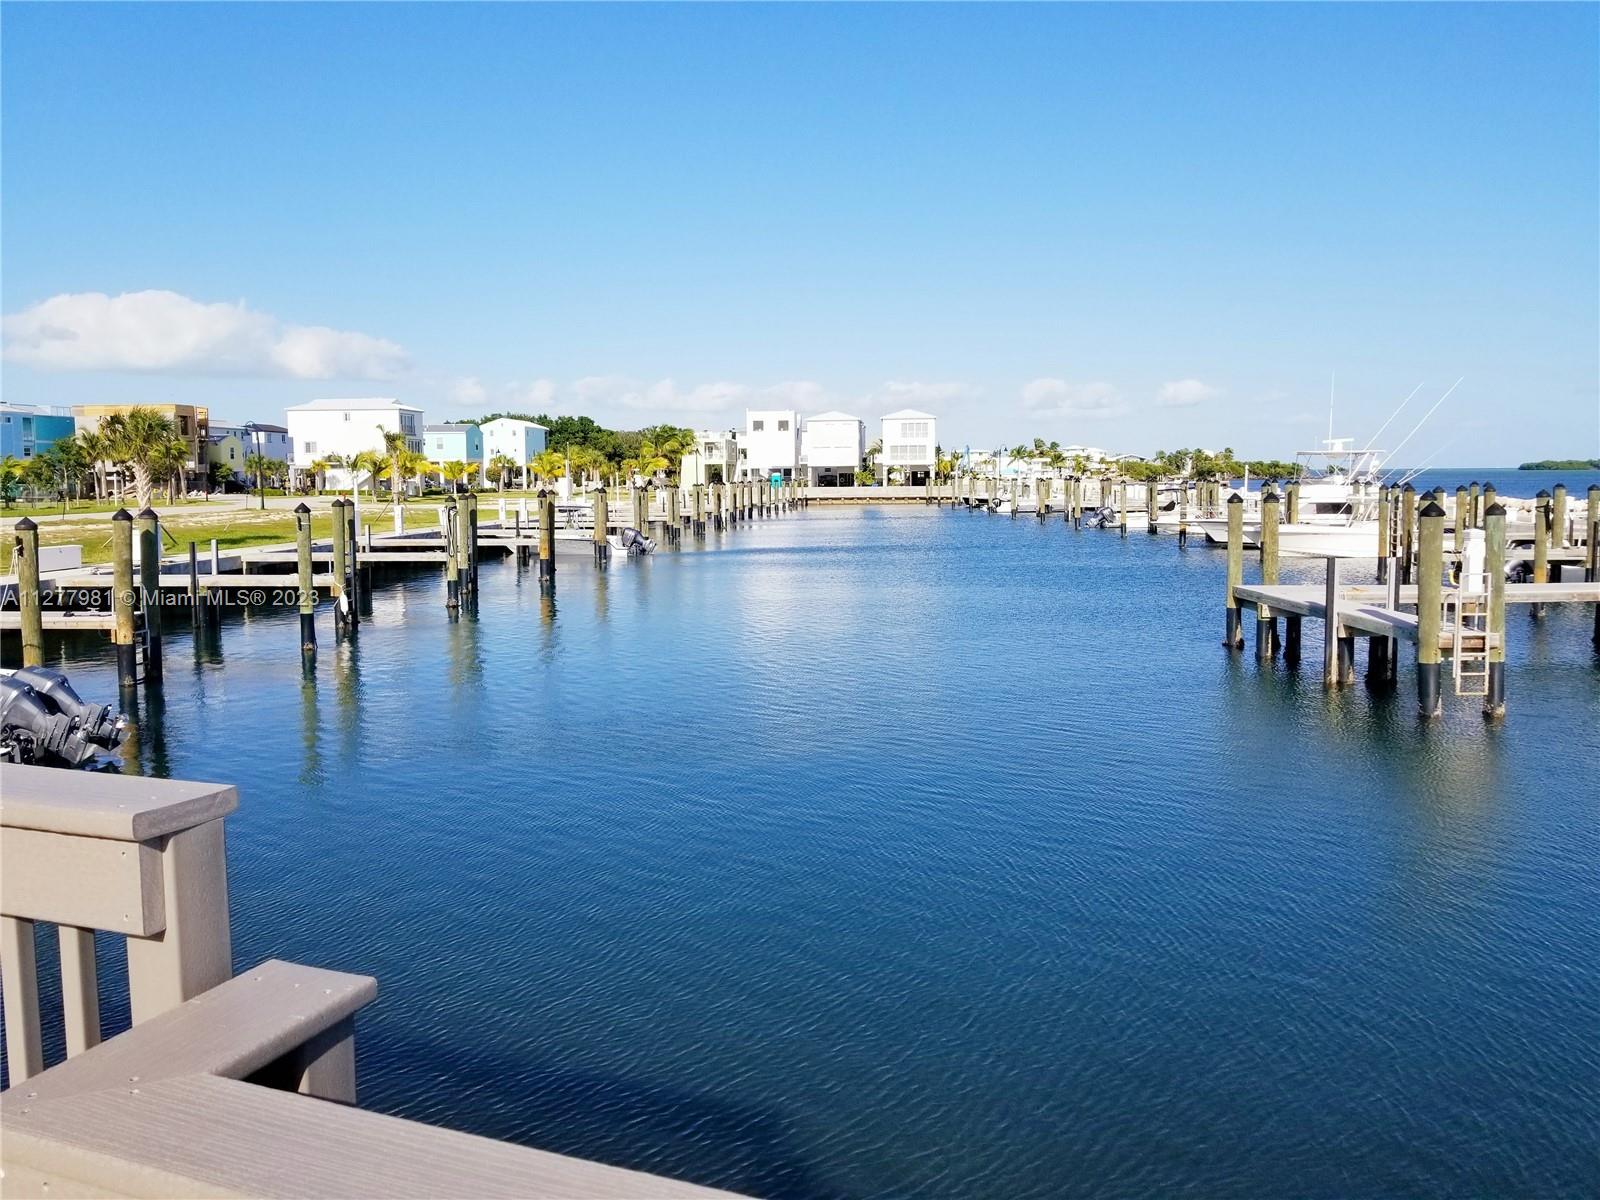 Lot 119 / View of Dock and Community from Pier